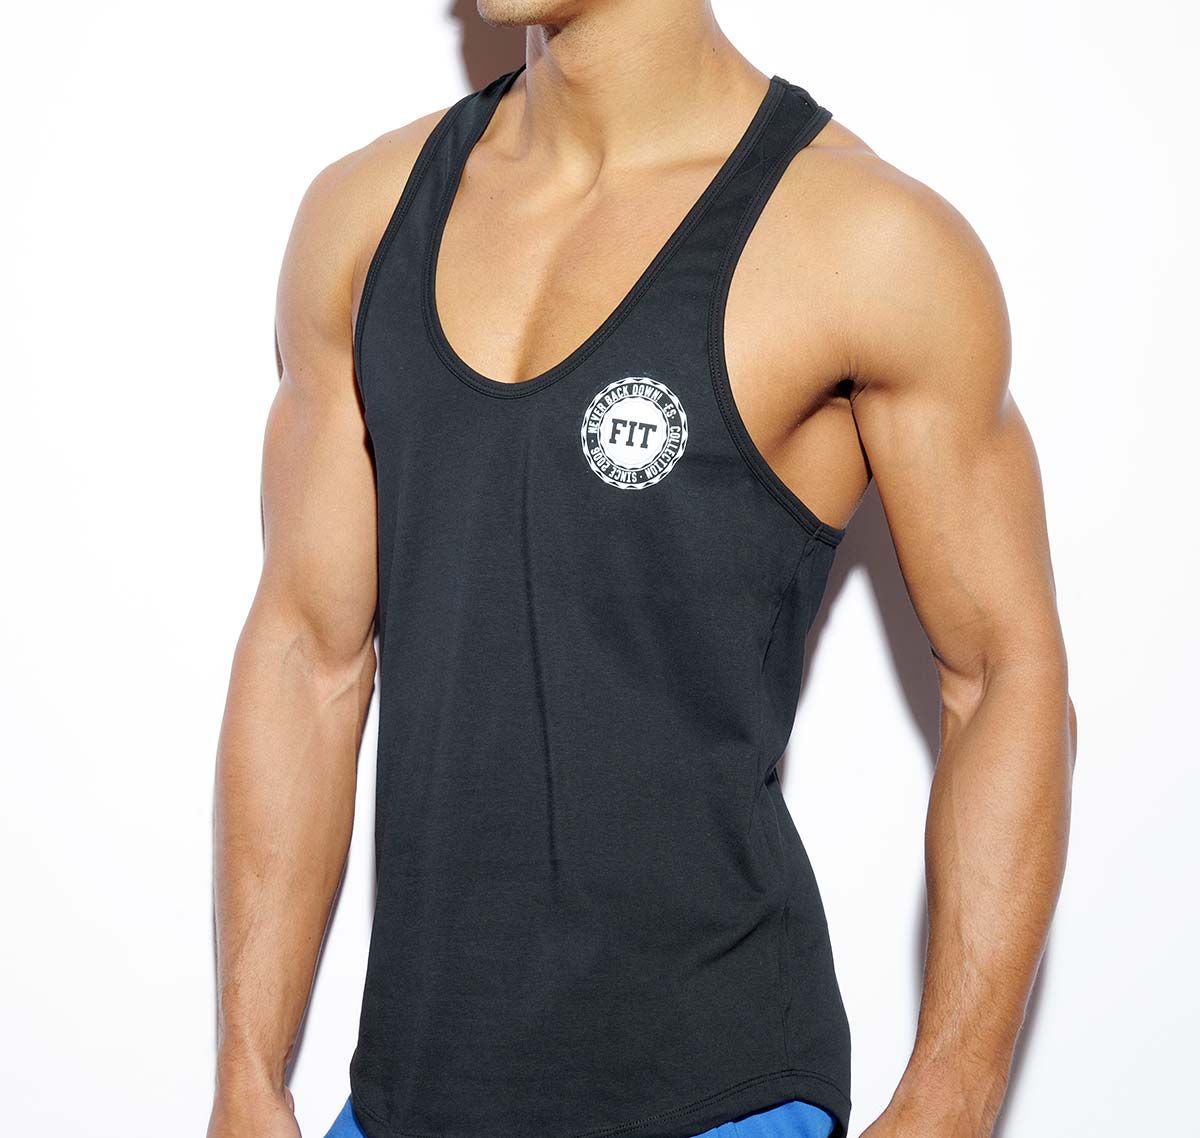 ES Collection NEVER BACK DOWN TANK TOP TS171, schwarz